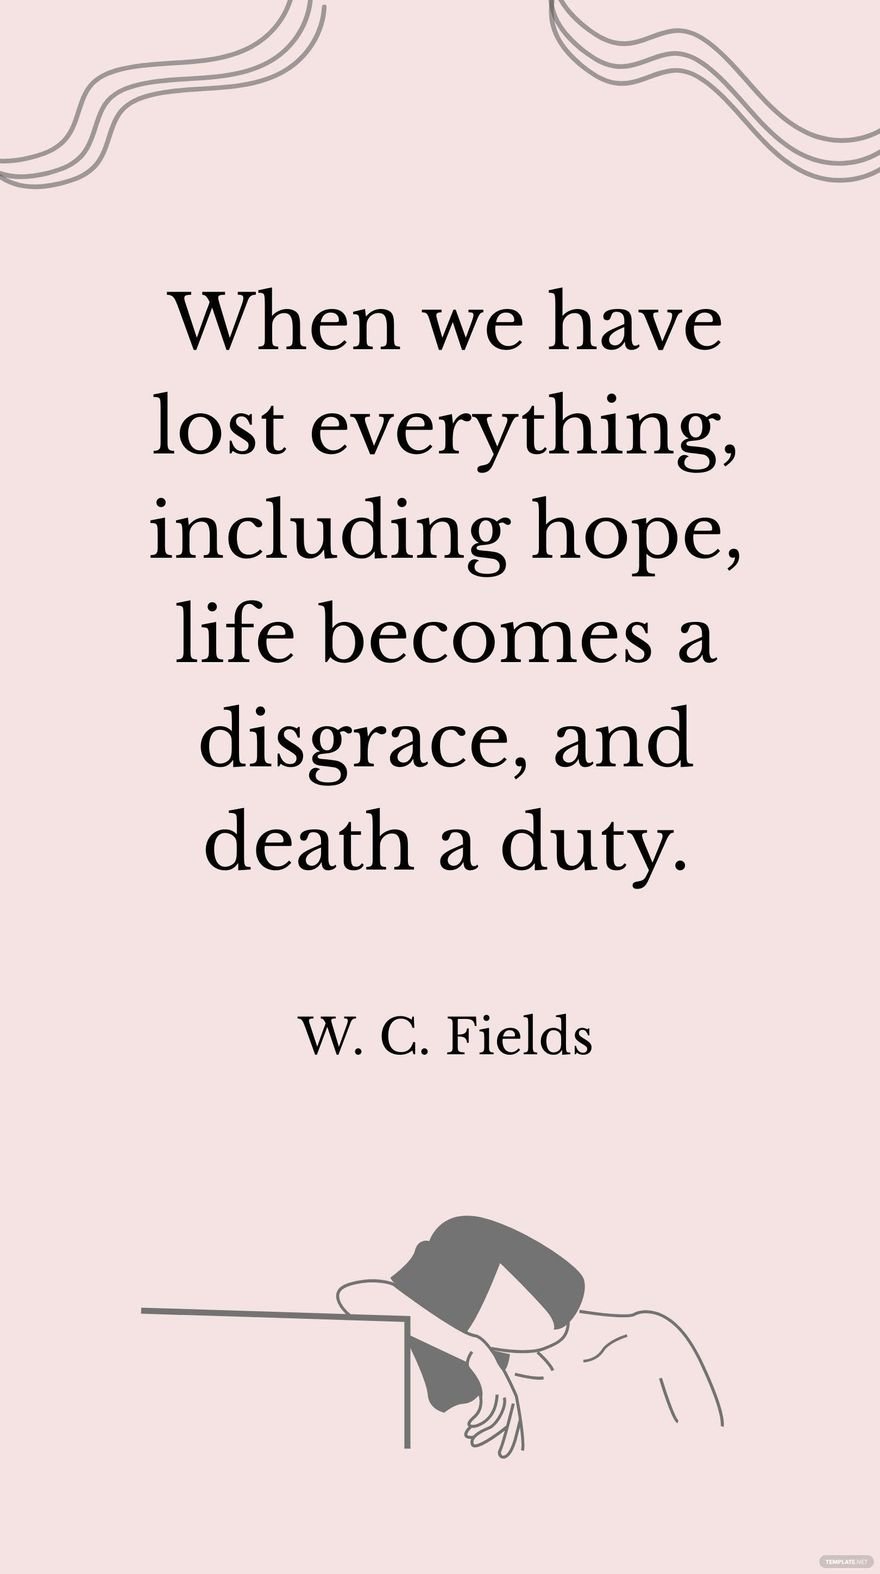 Free W. C. Fields - When we have lost everything, including hope, life becomes a disgrace, and death a duty. in JPG